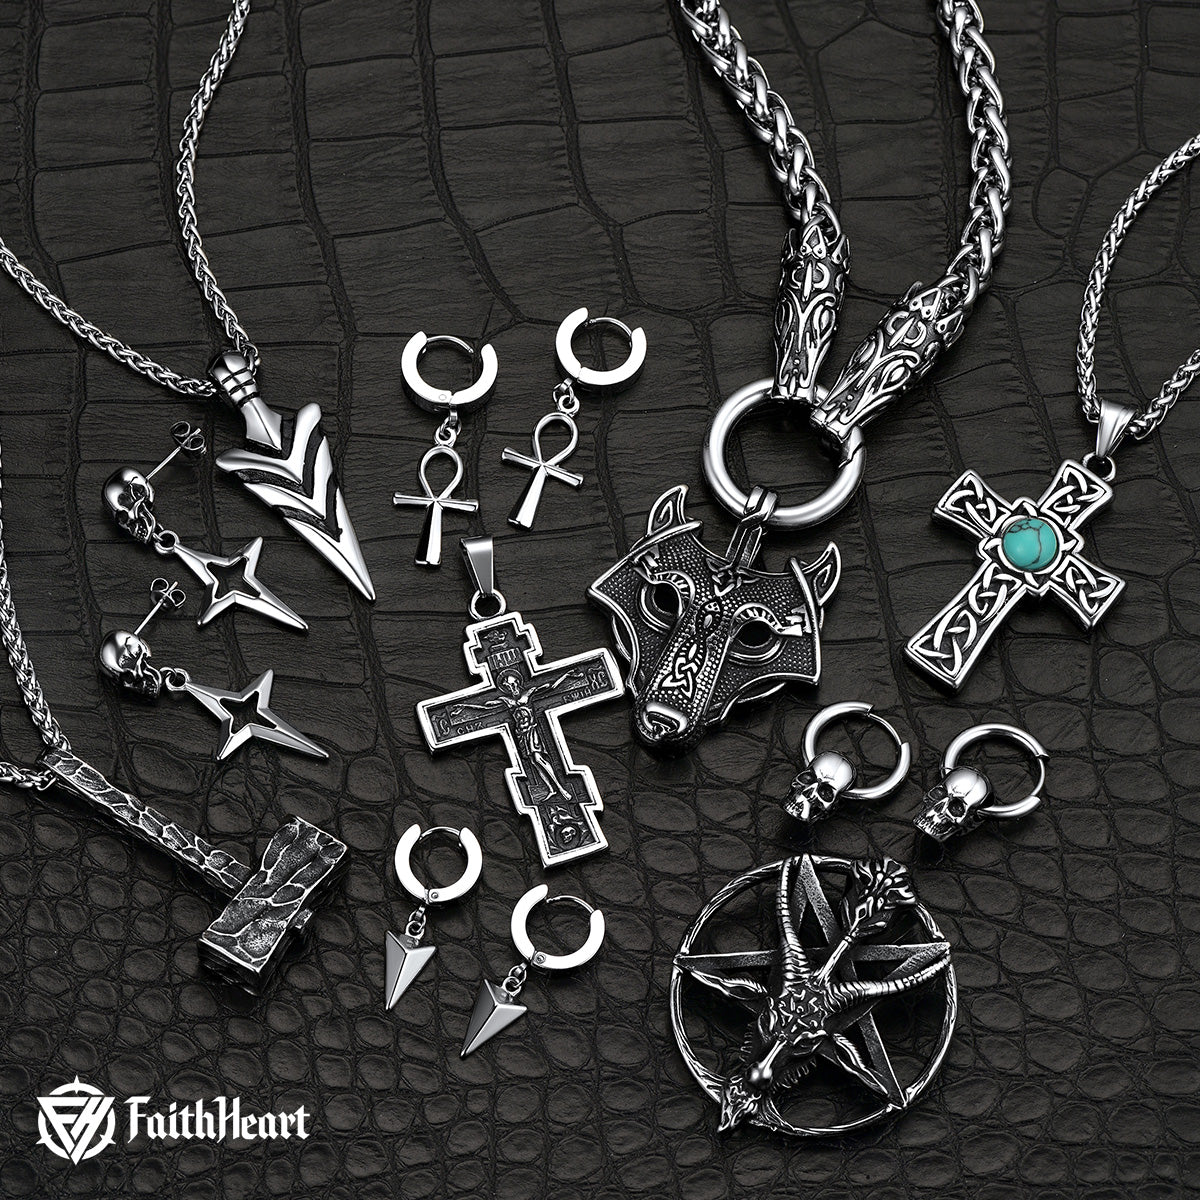 Shop Norse Viking Jewelry Religious Jewelry For Men – FaithHeart